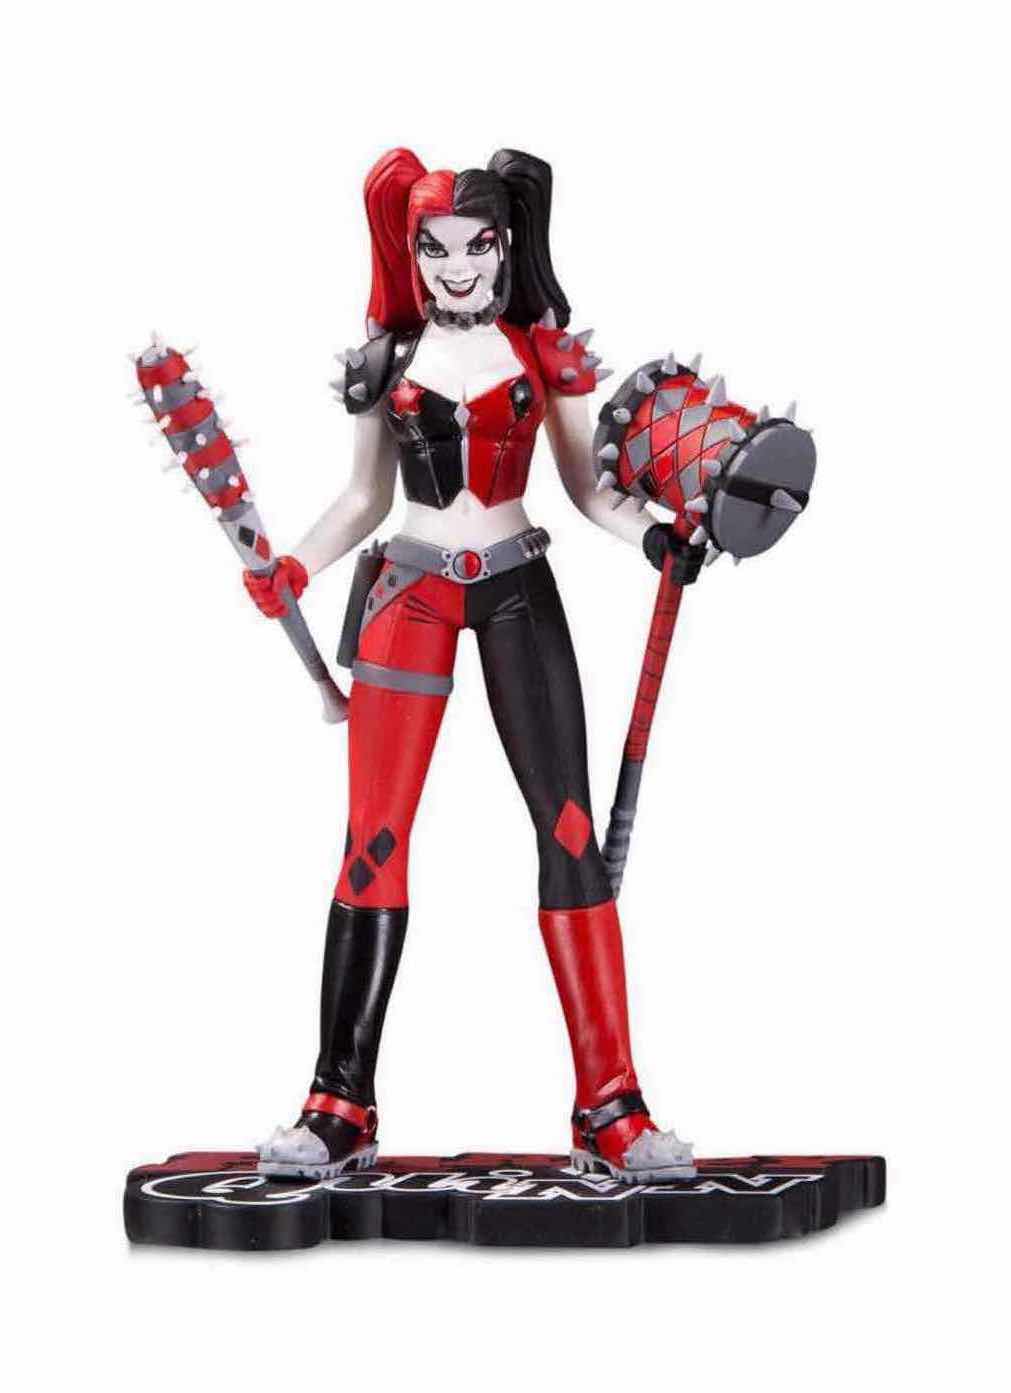 Photo 1 of BRAND NEW MCFARLANE TOYS DC DIRECT HARLEY QUINN RED, WHITE & BLACK 7” RESIN STATUE BY AMANDA CONNER, NUMBERED LIMITED EDITION 